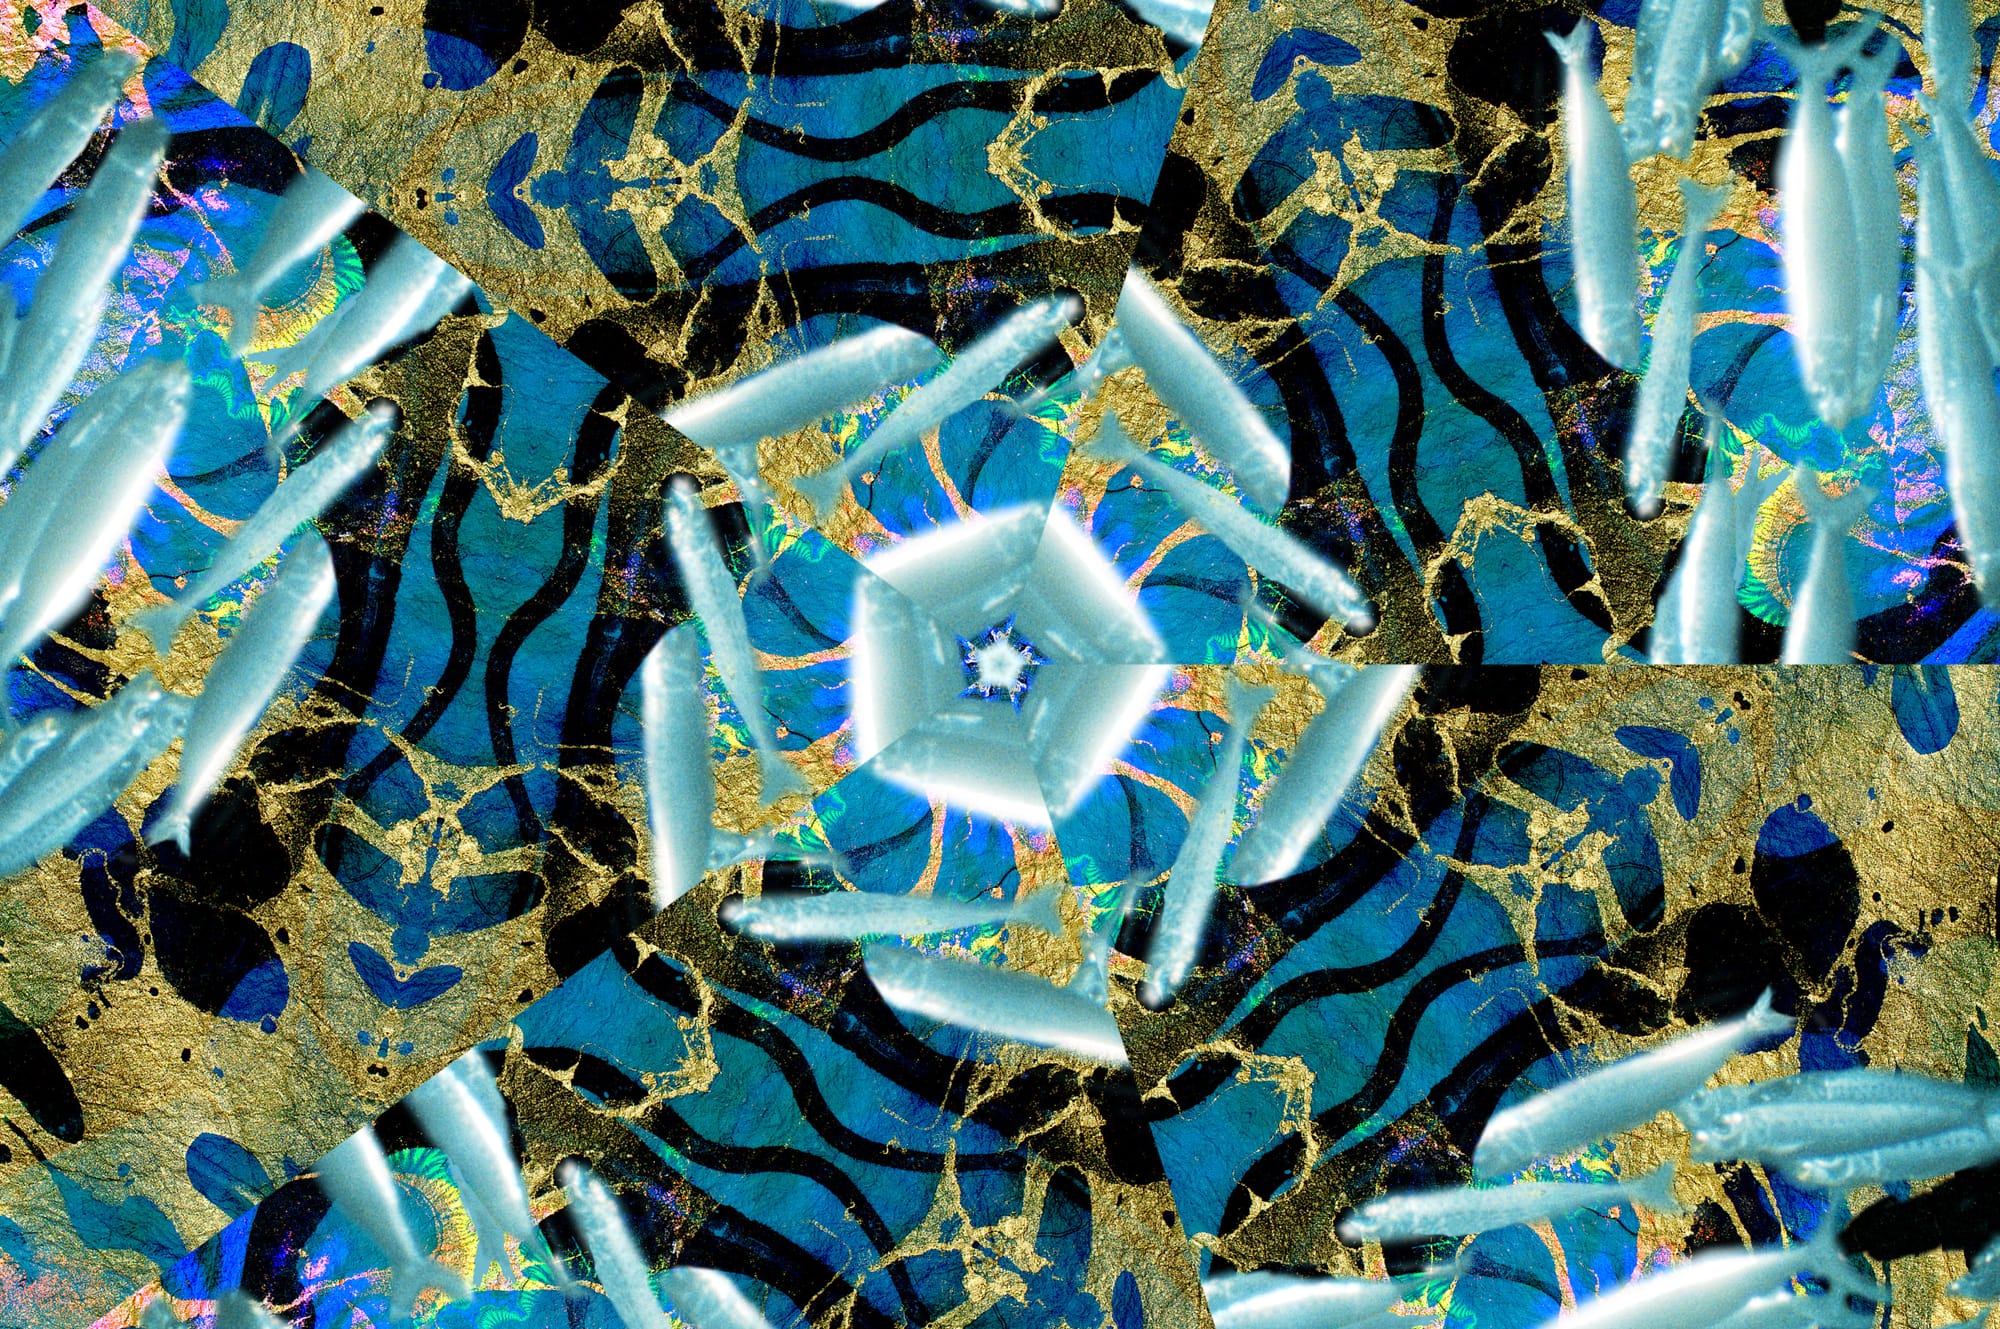 A blue and gold kaleidoscope of abstract shapes and colors